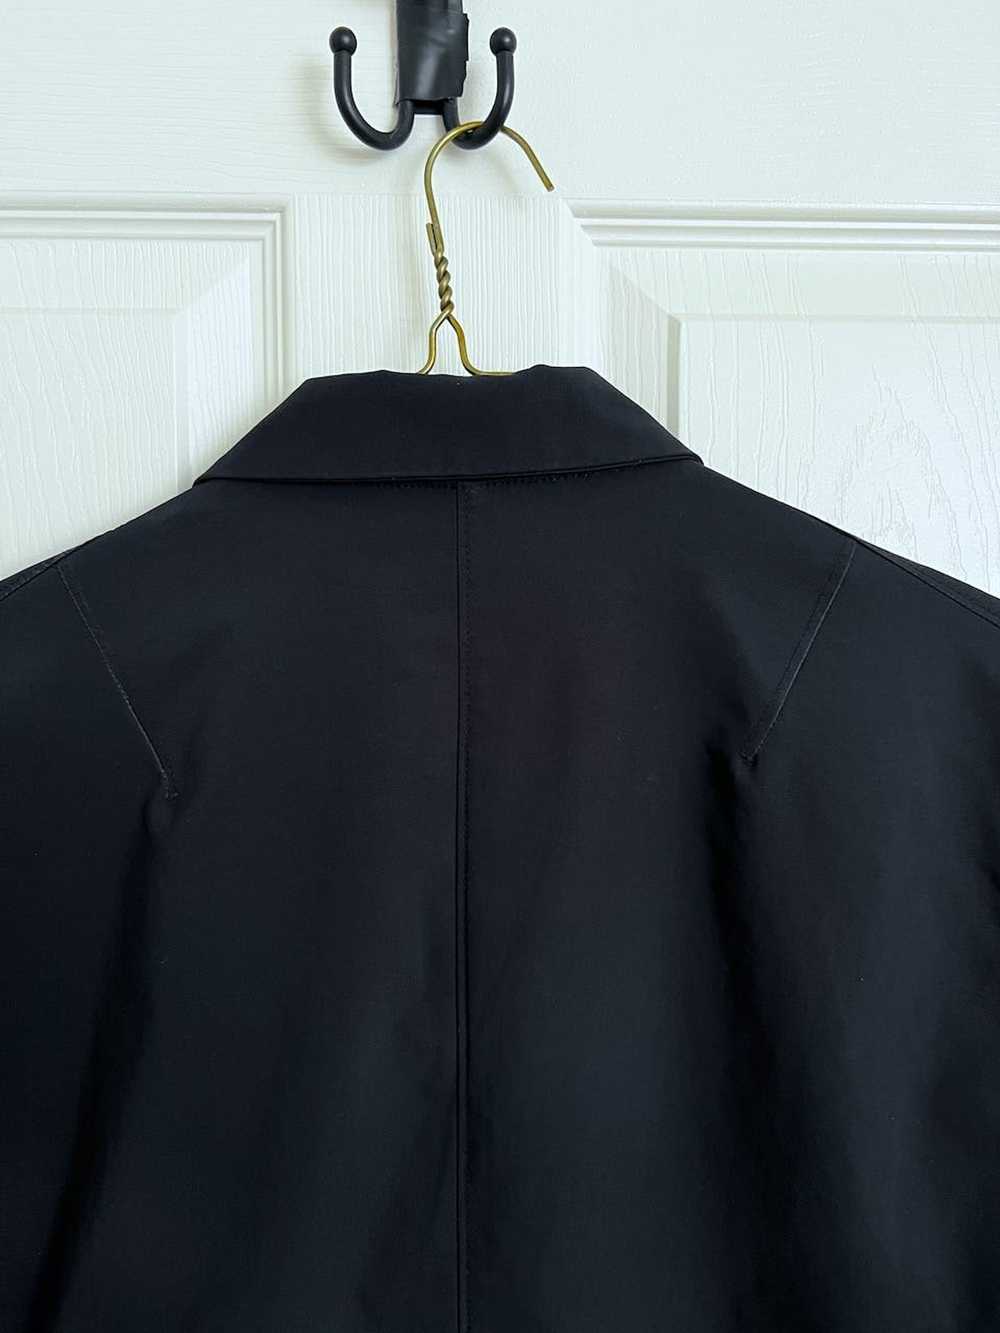 Nau Stretch Recycled Polyester Commuter Jacket - image 5